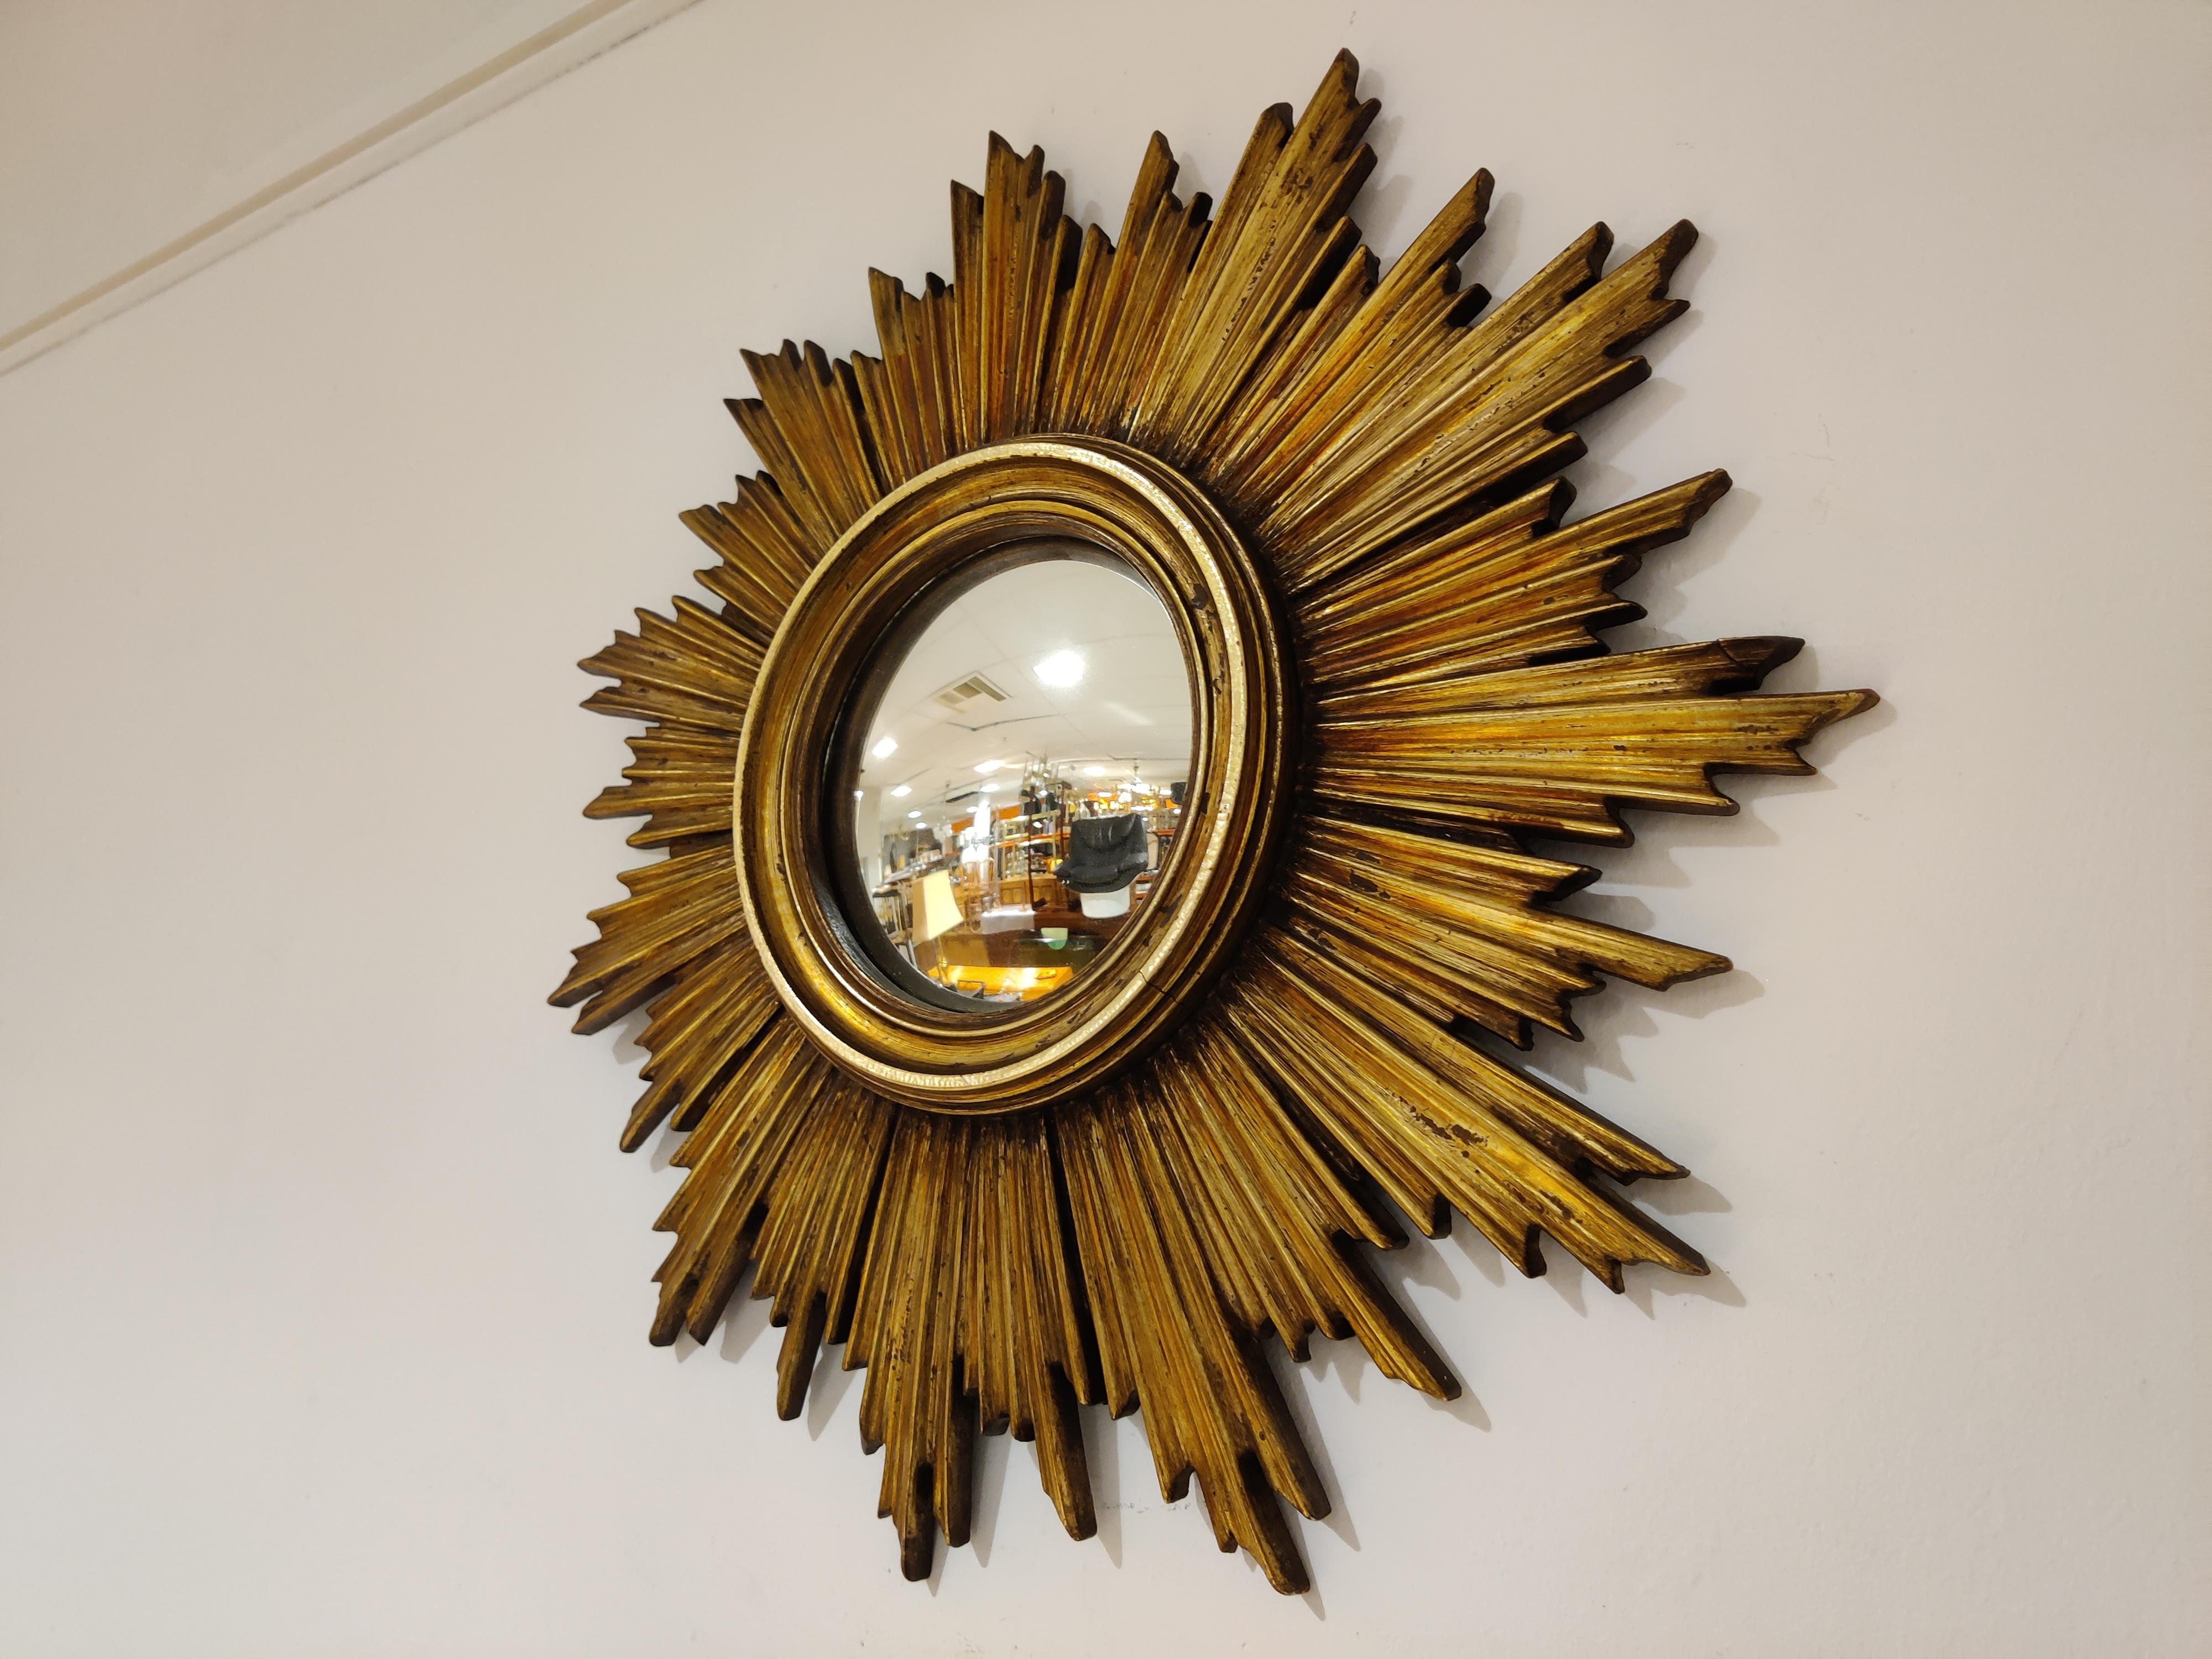 Gilded resin sunburst mirror with convex mirror glass.

The golden mirror is in a very good condition.

Beautiful eye catching mirror,

1960s, Belgium

Good condition.

Dimensions:

Diameter: 46cm/18.11